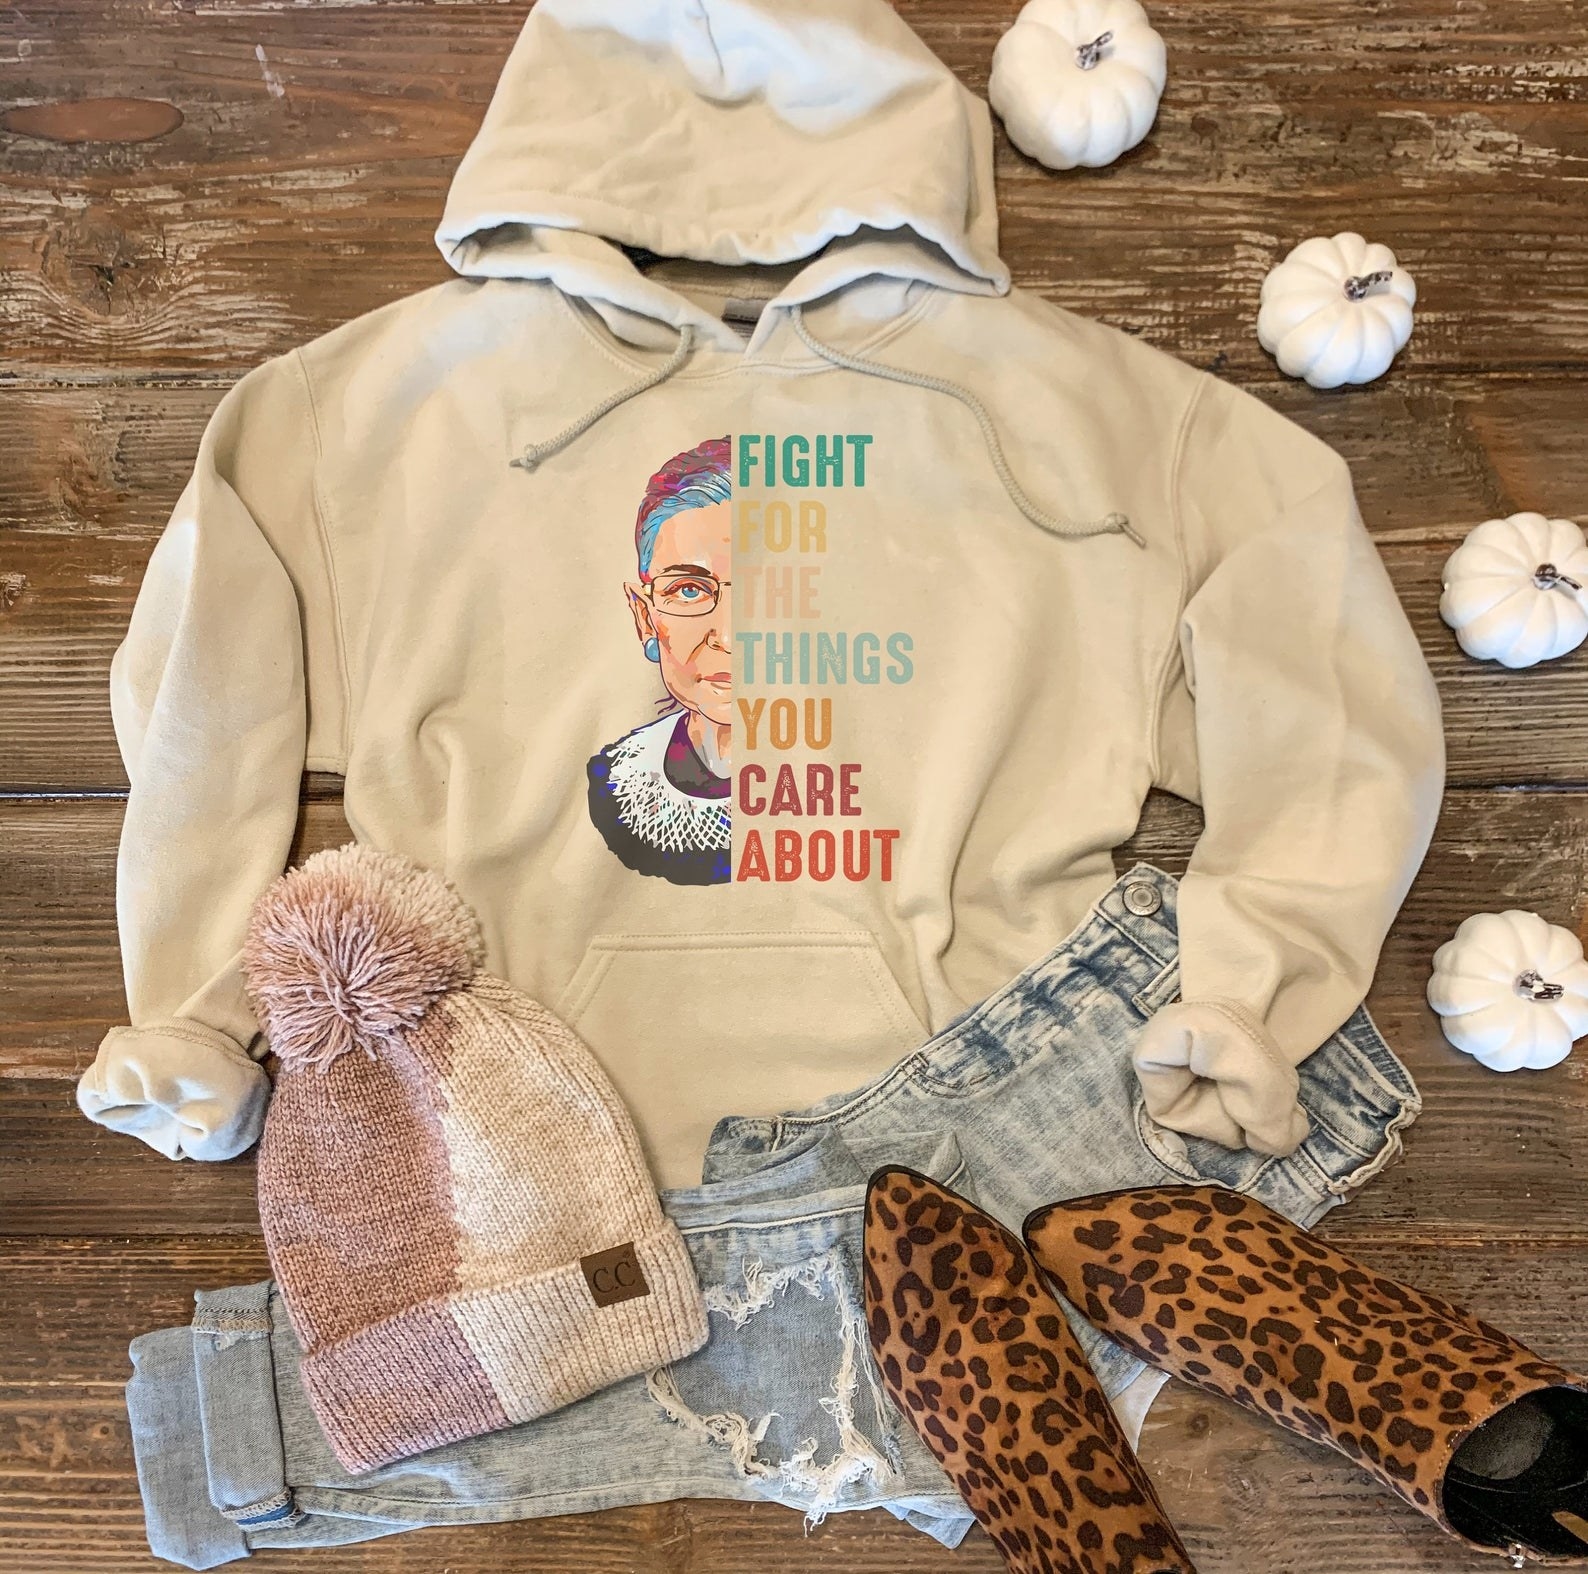 tan hoodie with a graphic design that shows an animated version of half of Justice Ginsburg&#x27;s face and the other half (where her face would be) has a quote that says &quot;Fight for the things you care about.&quot; Sweet!